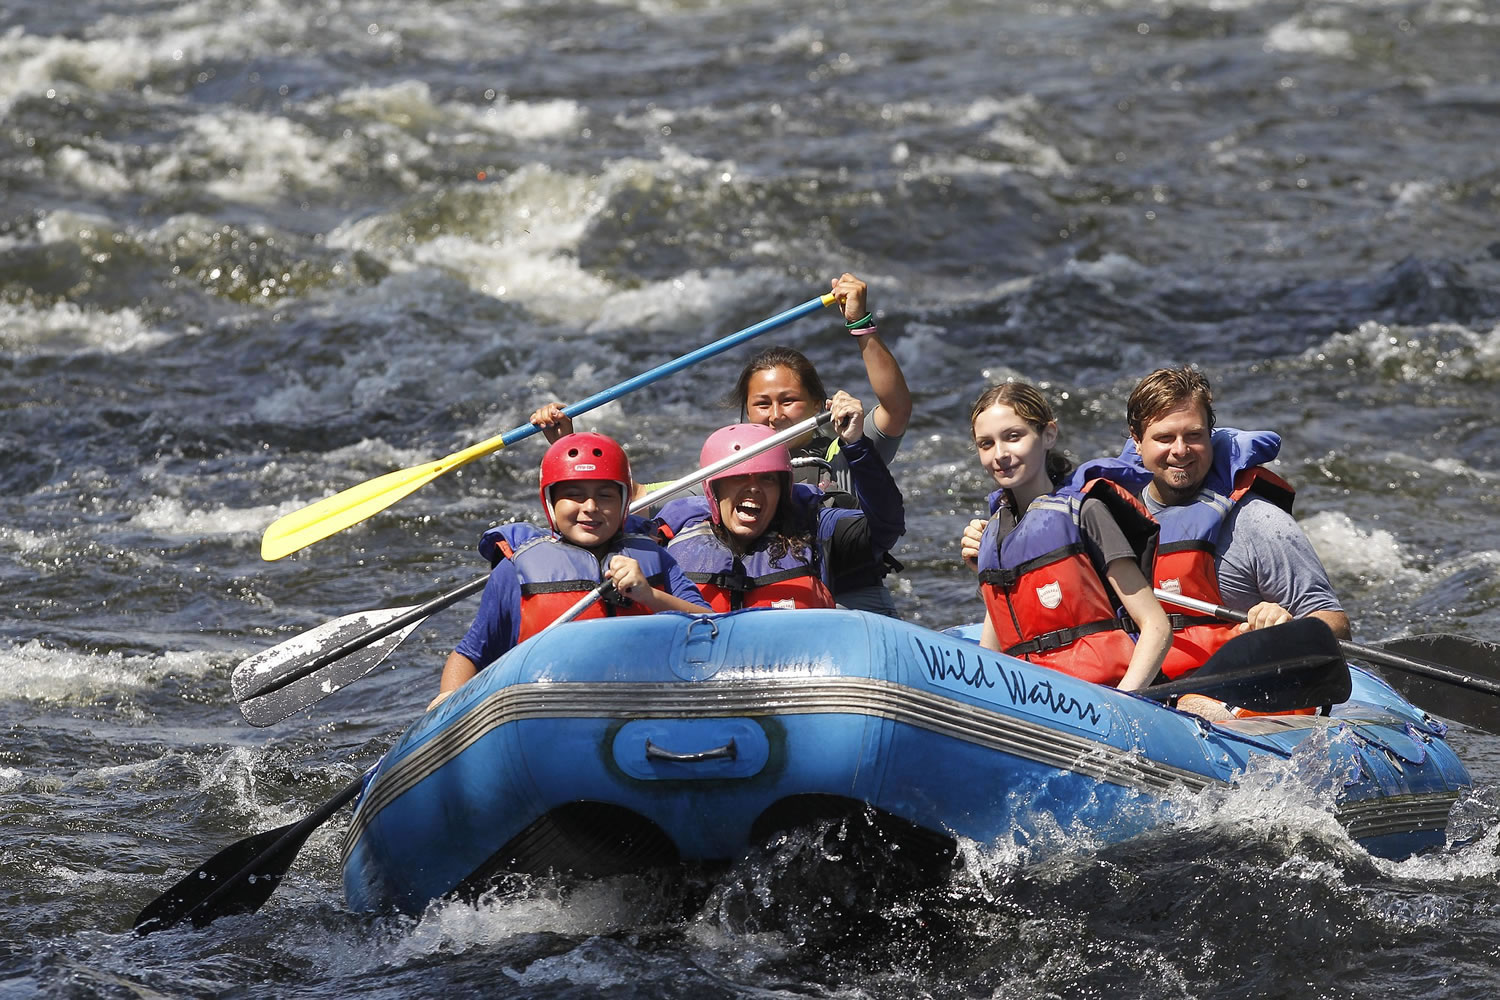 Whitewater rafters going down the Sacandaga River in Lake Luzerne, N.Y.